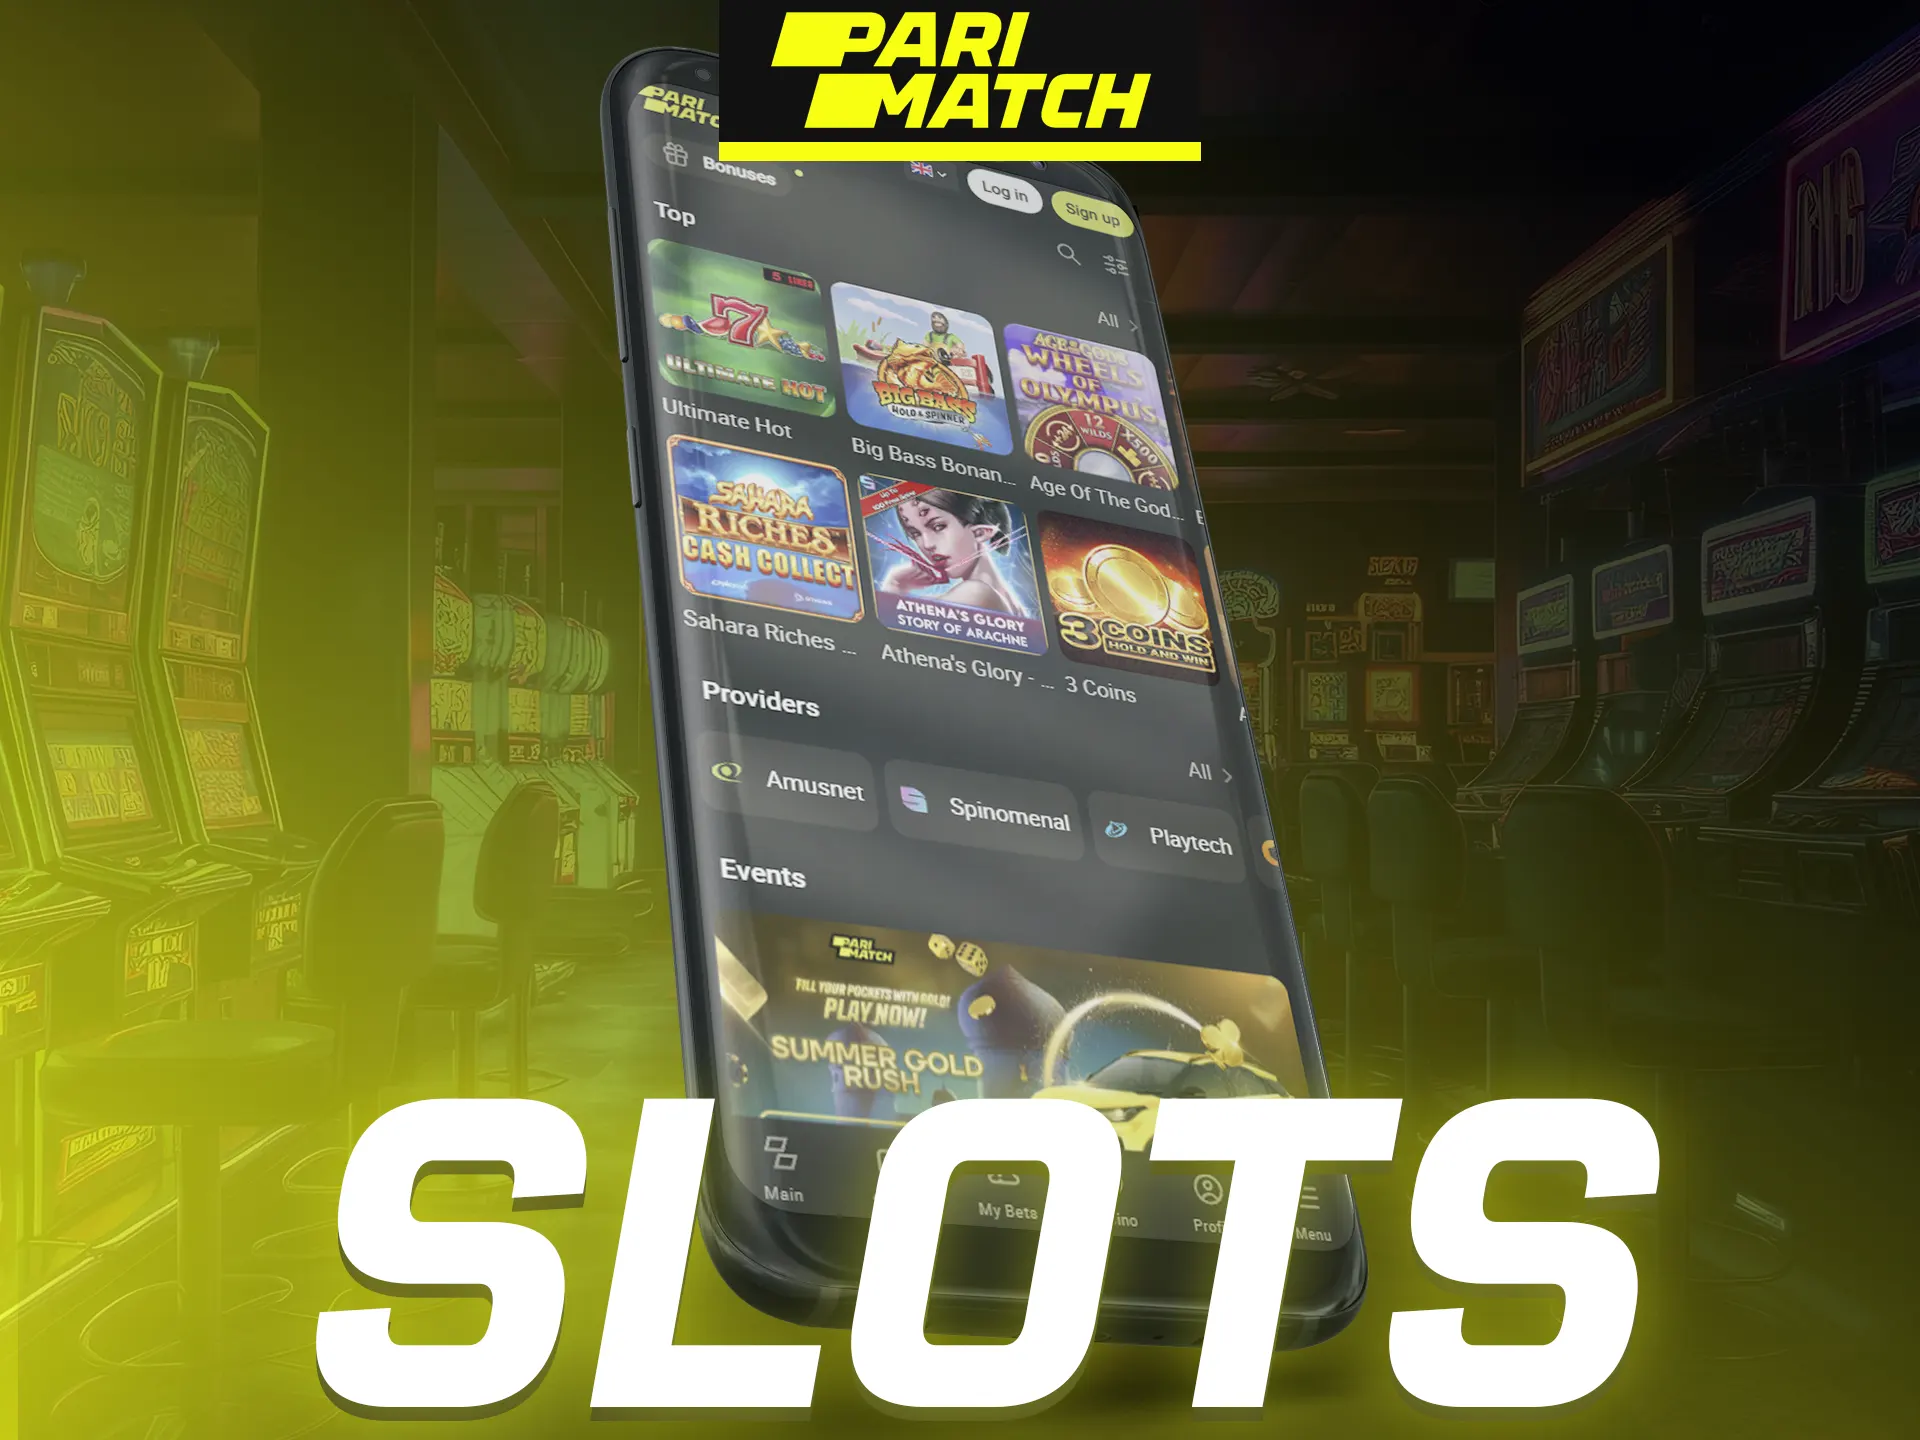 Play slots on the Parimatch mobile app.